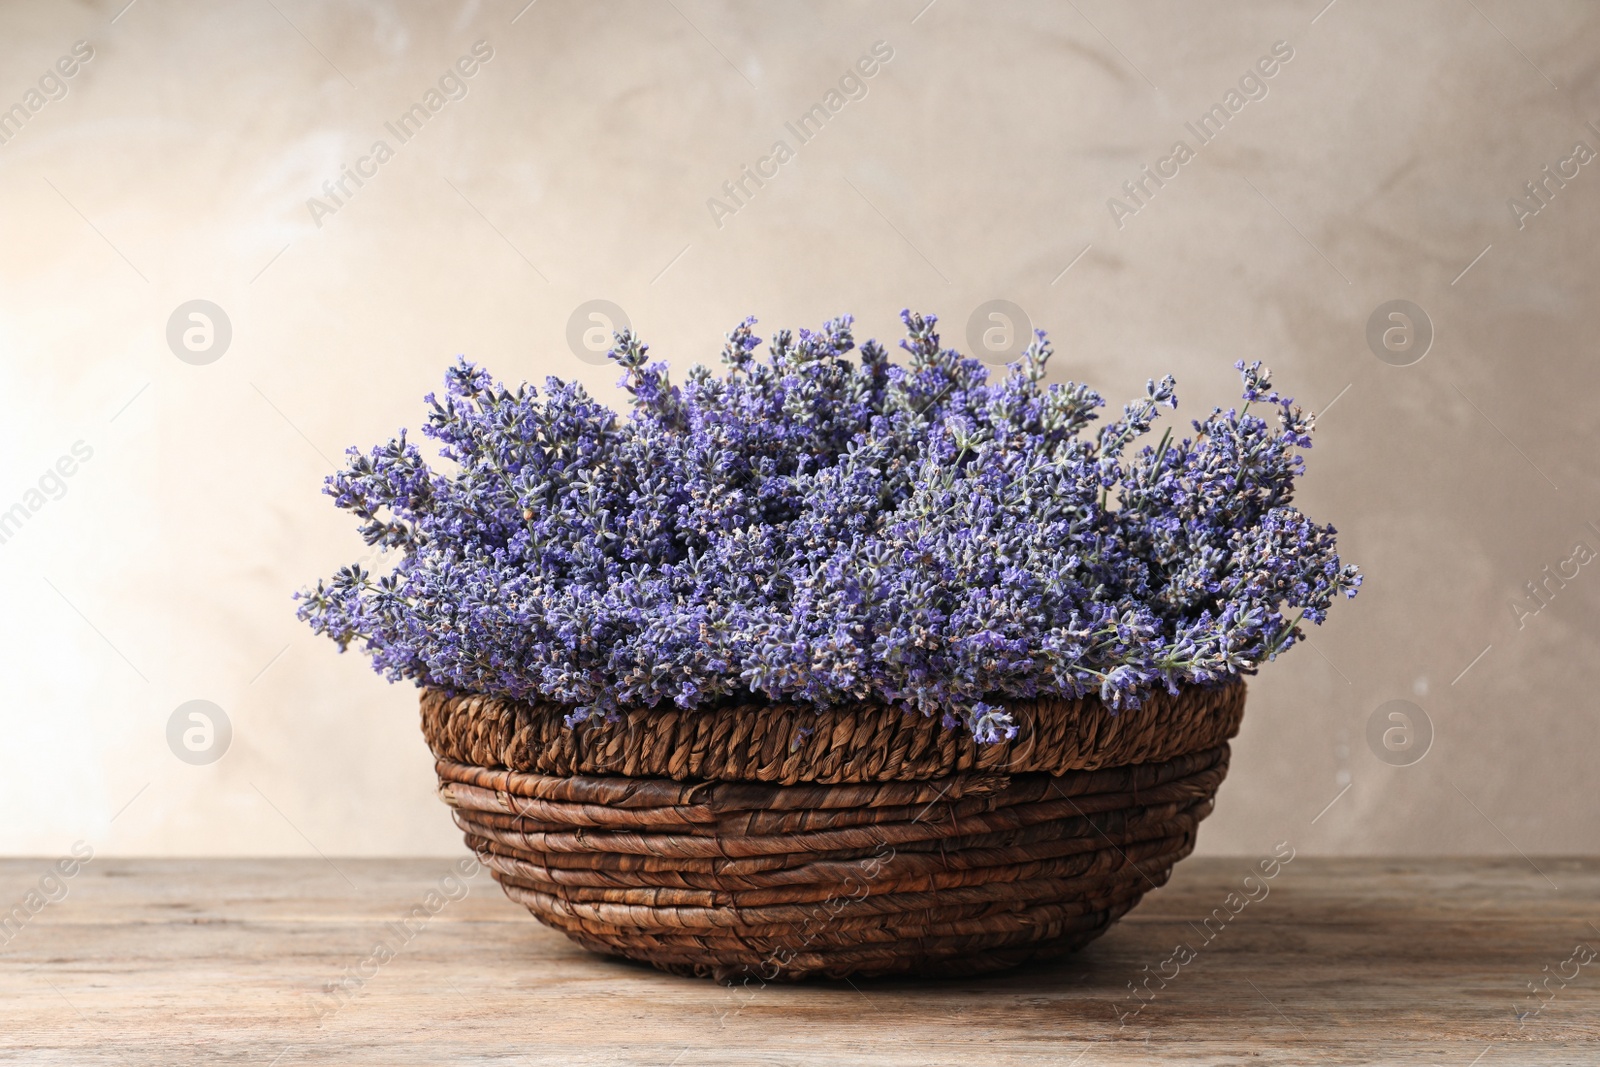 Photo of Fresh lavender flowers in basket on wooden table against beige background